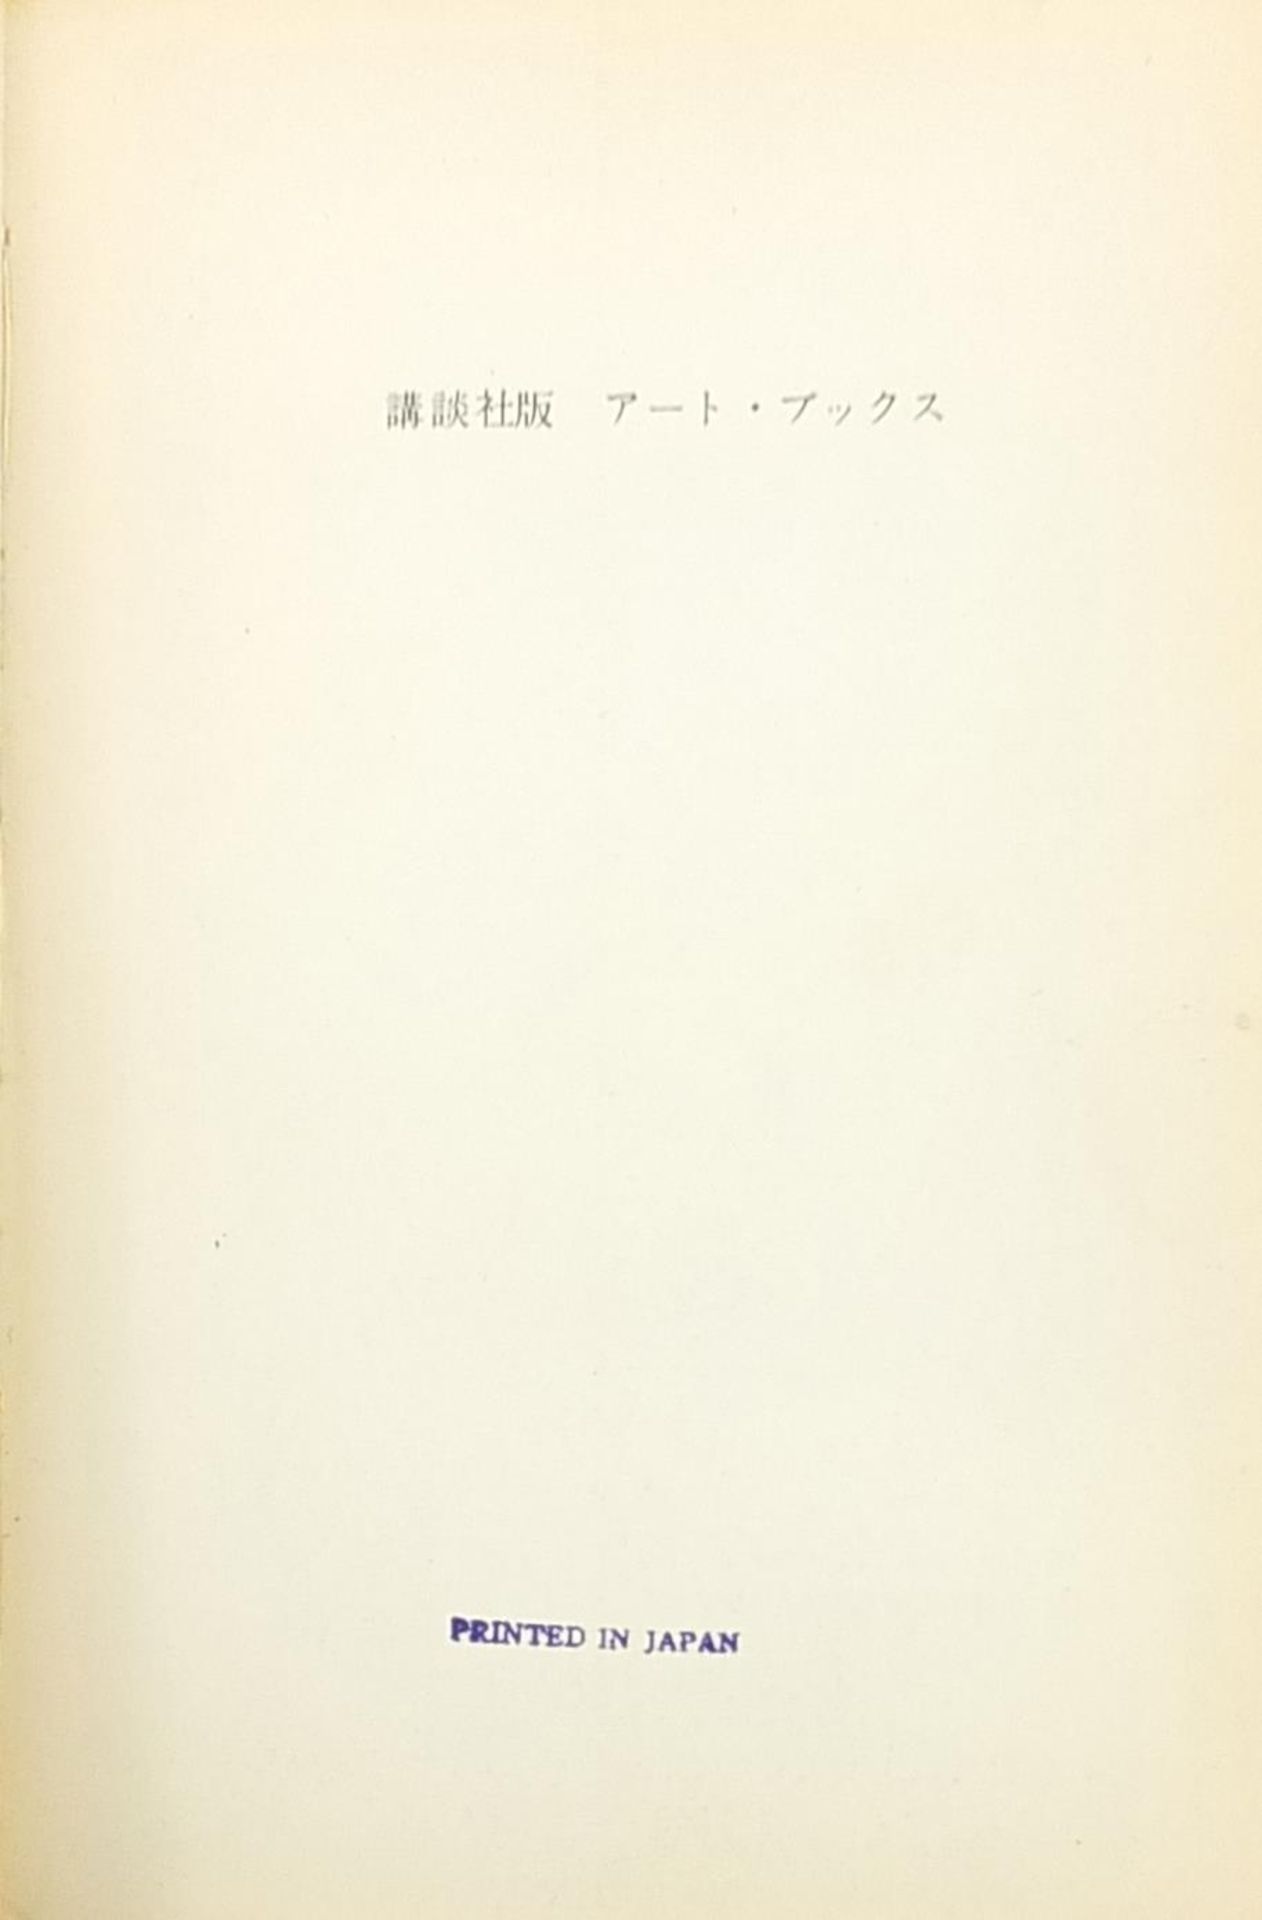 Collection of Japanese related mostly hardback books including The Japanese influence in America - Image 4 of 4